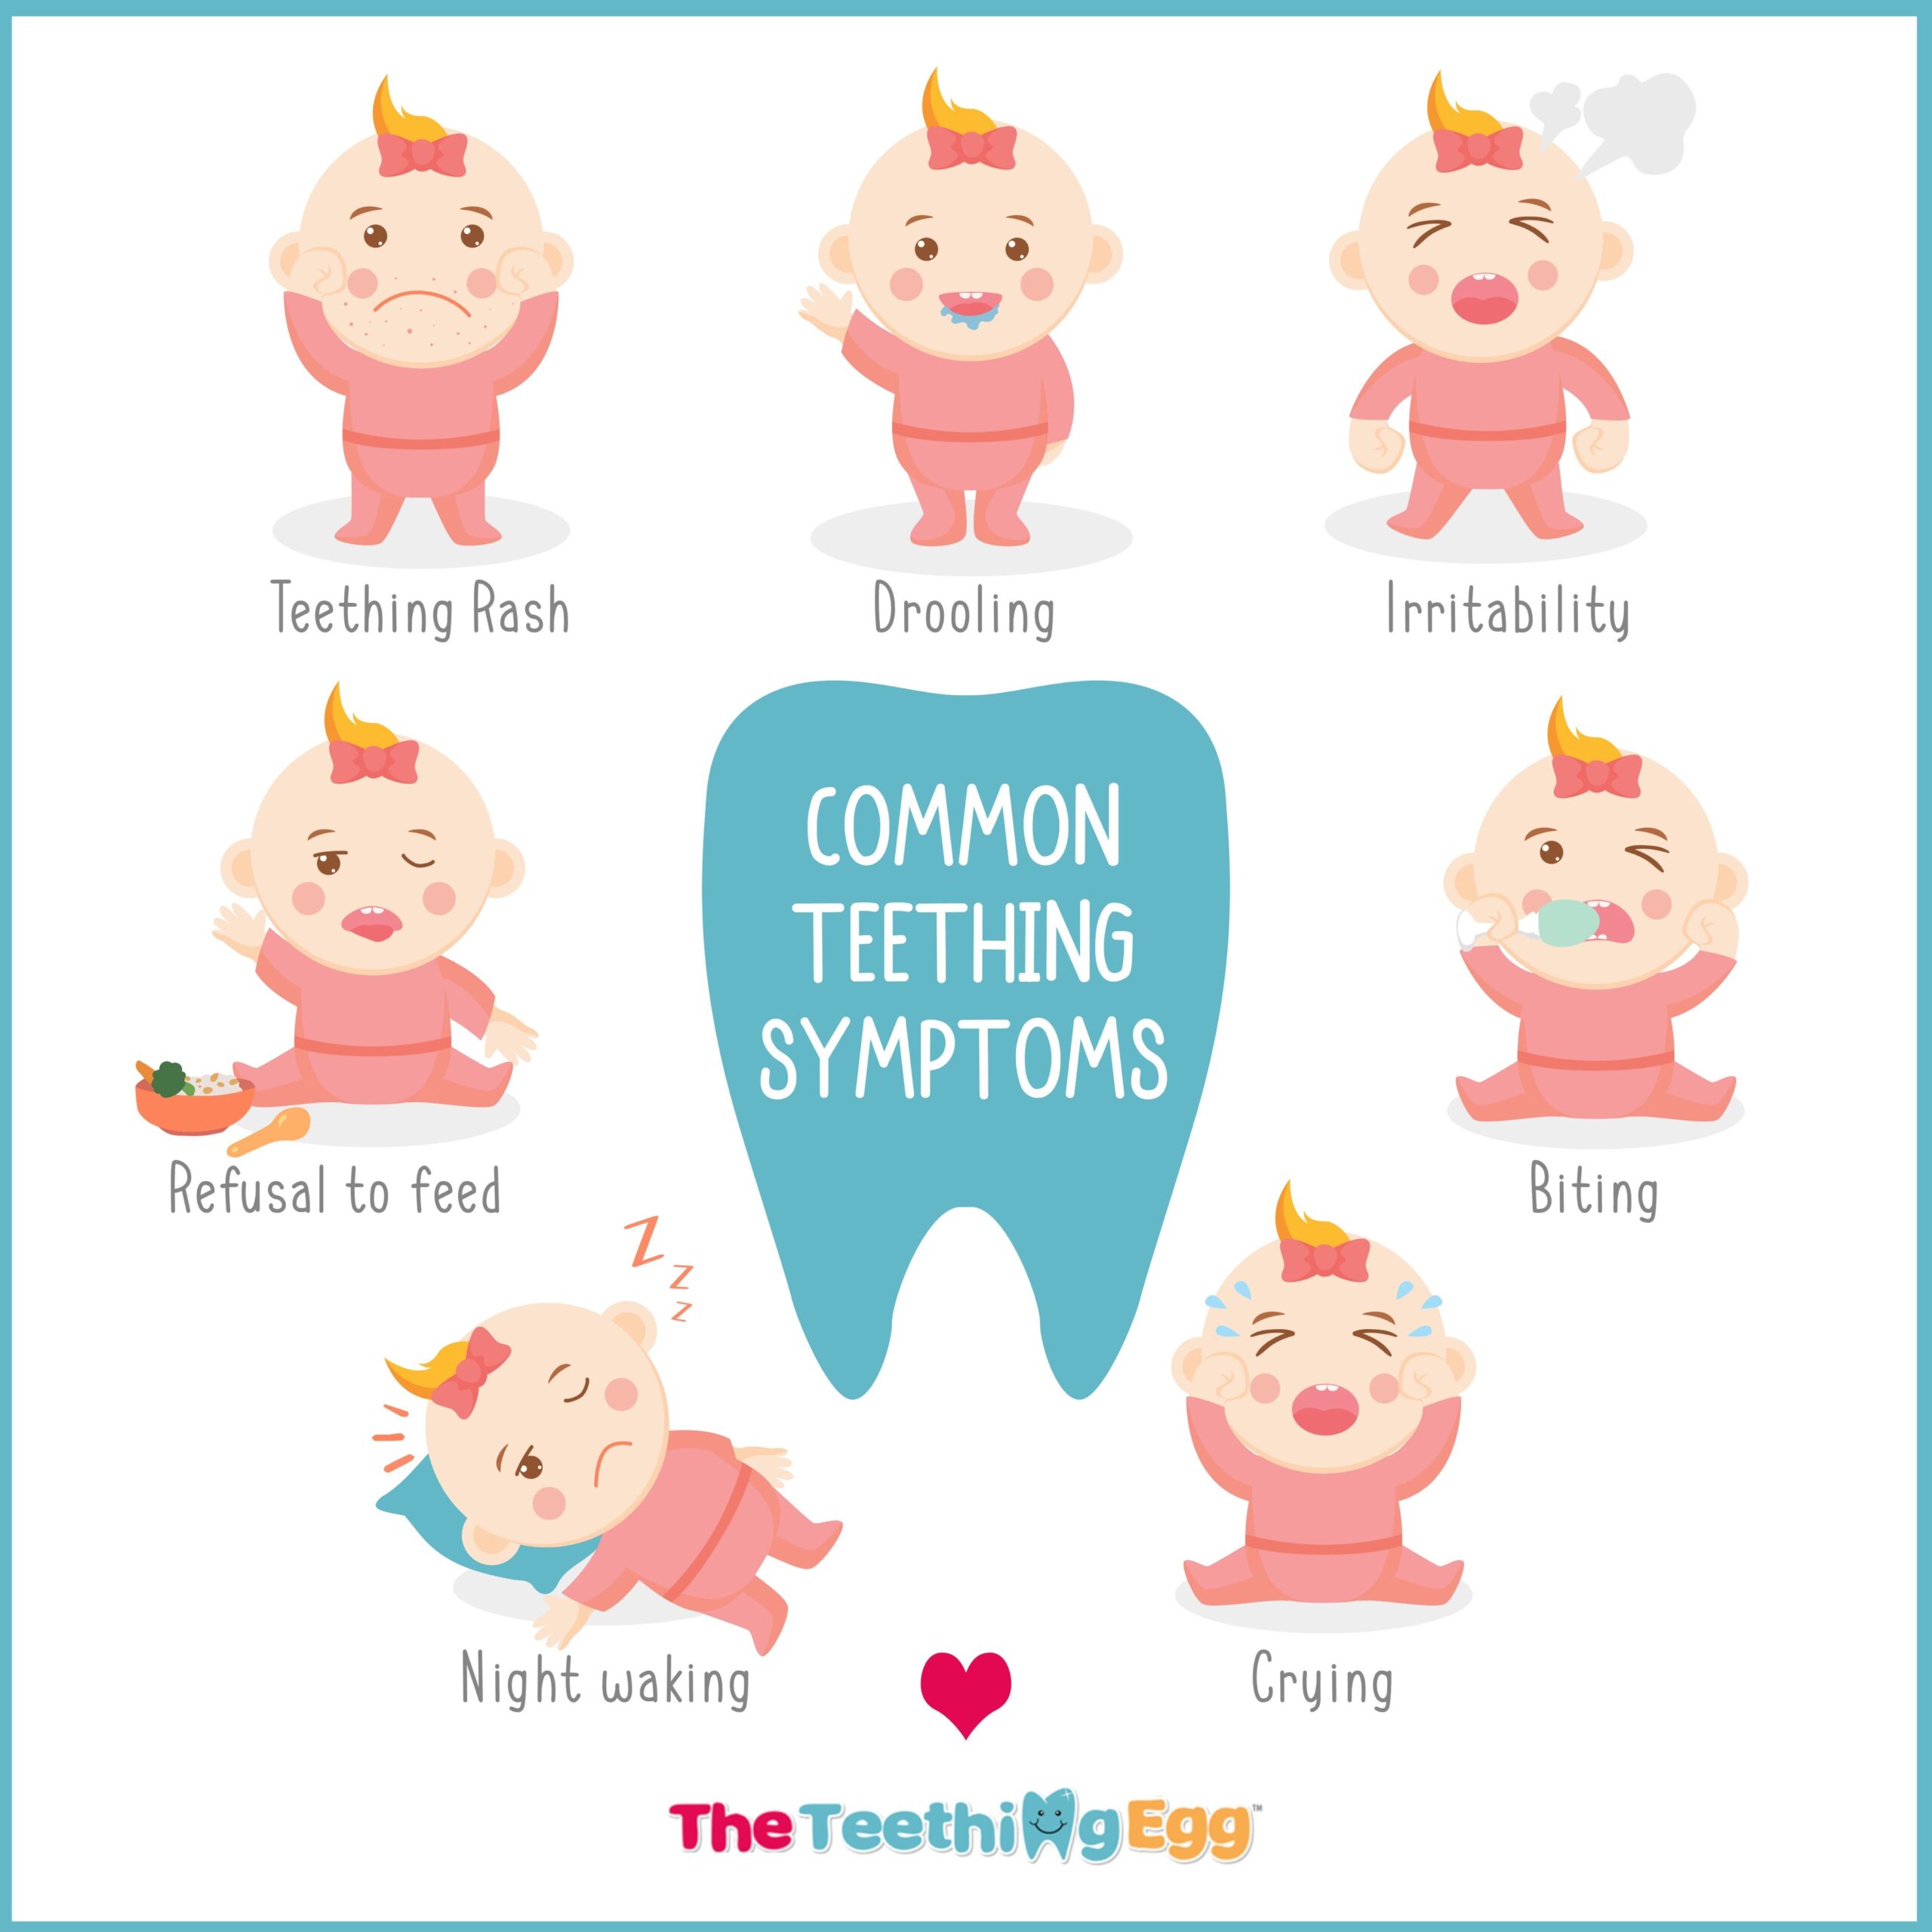 Is your baby teething?